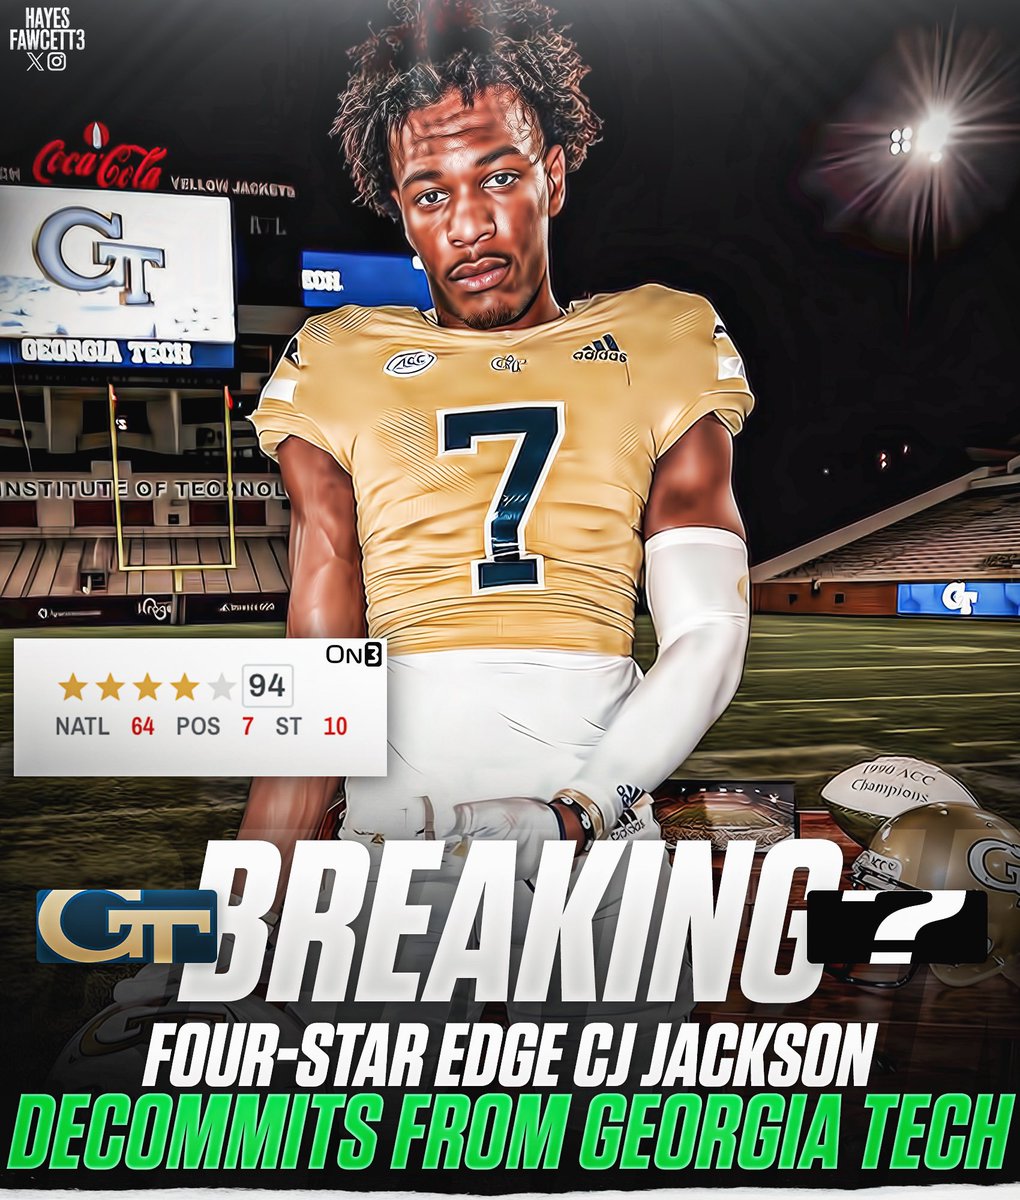 BREAKING: Four-Star EDGE CJ Jackson tells me he has Decommitted from Georgia Tech The 6’3 225 EDGE from Tucker, GA is ranked as a Top 65 Player in the ‘24 Class (per On3) The Top Uncommitted EDGE holds 22 offers including Georgia, Colorado, Alabama, Clemson, & others